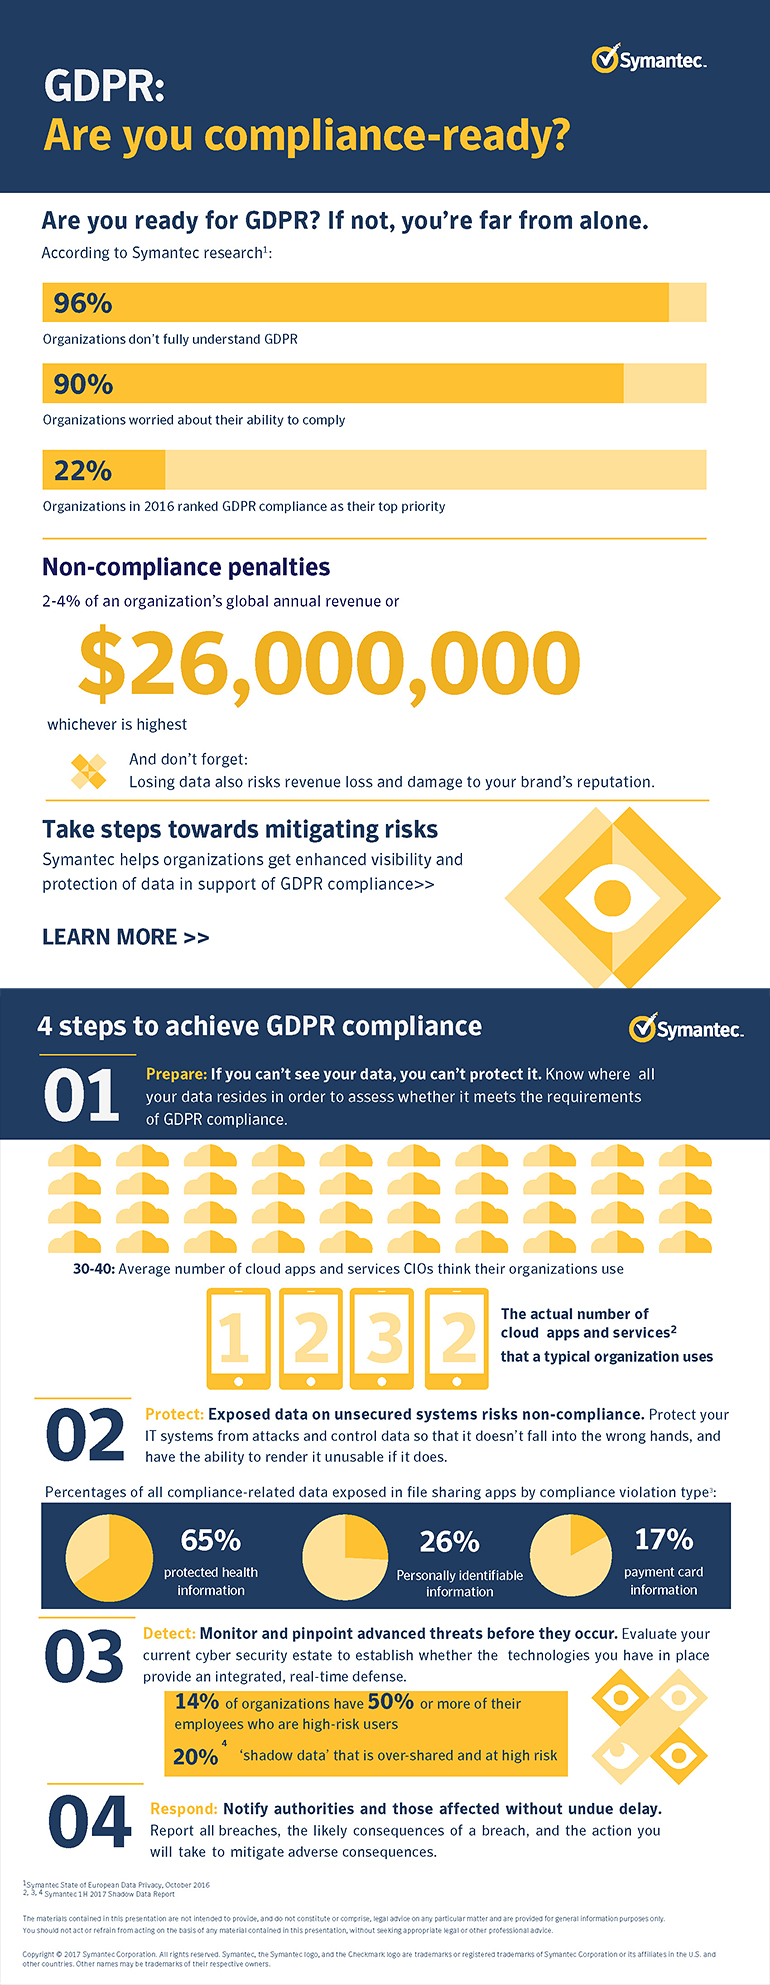 GDPR: Are You Compliance-Ready infographic as described by the text below